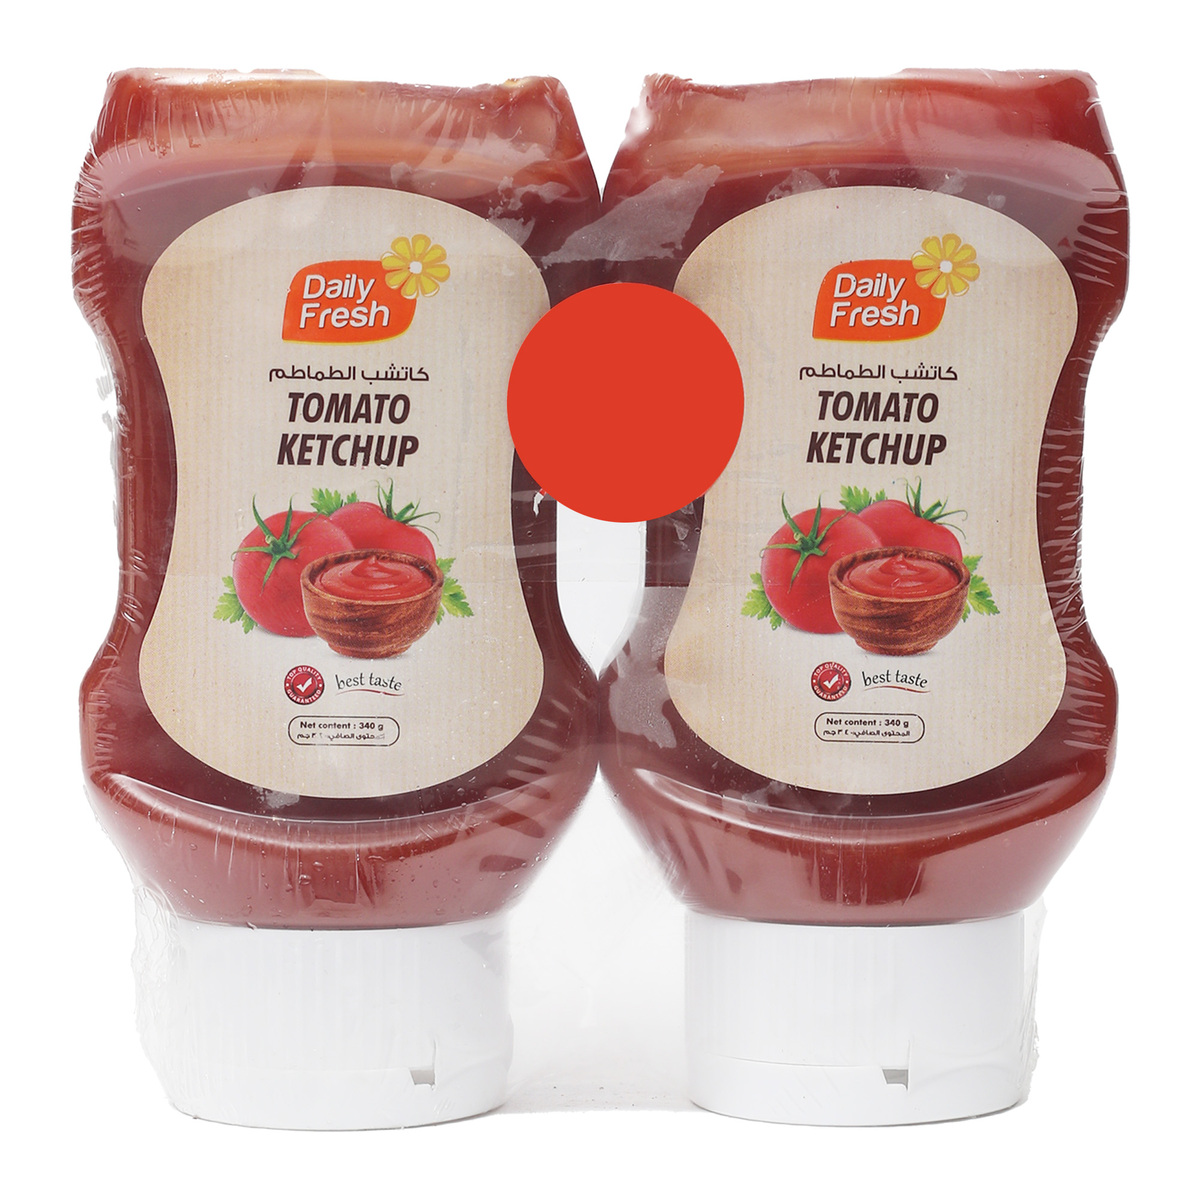 Daily Fresh Tomato Ketchup Value Pack 2 x 340 g